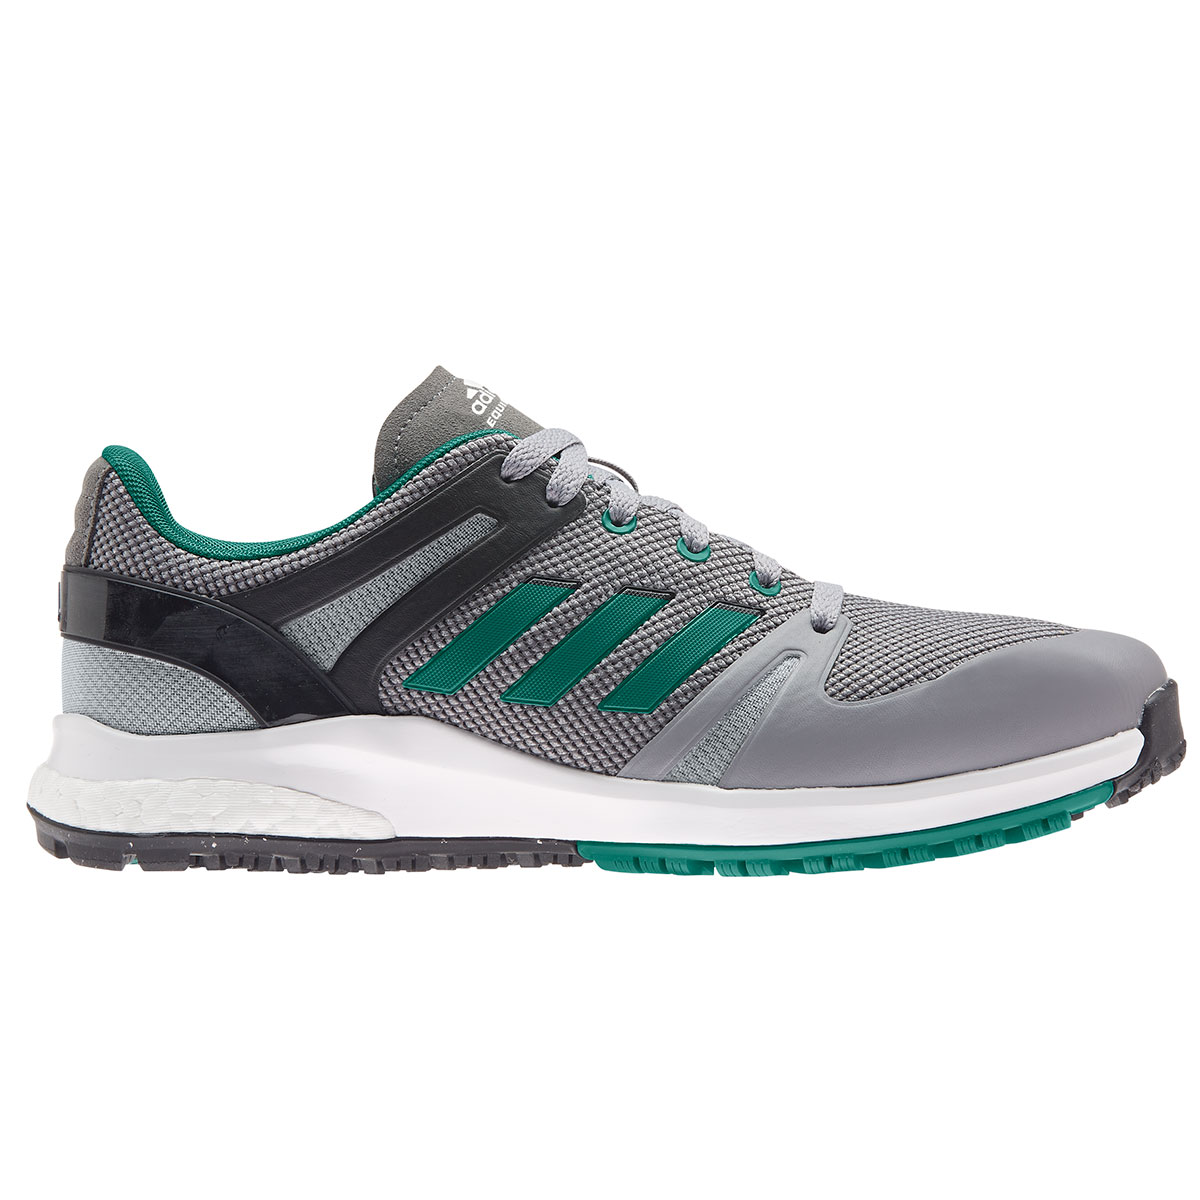 adidas Golf EQT Shoes from american golf